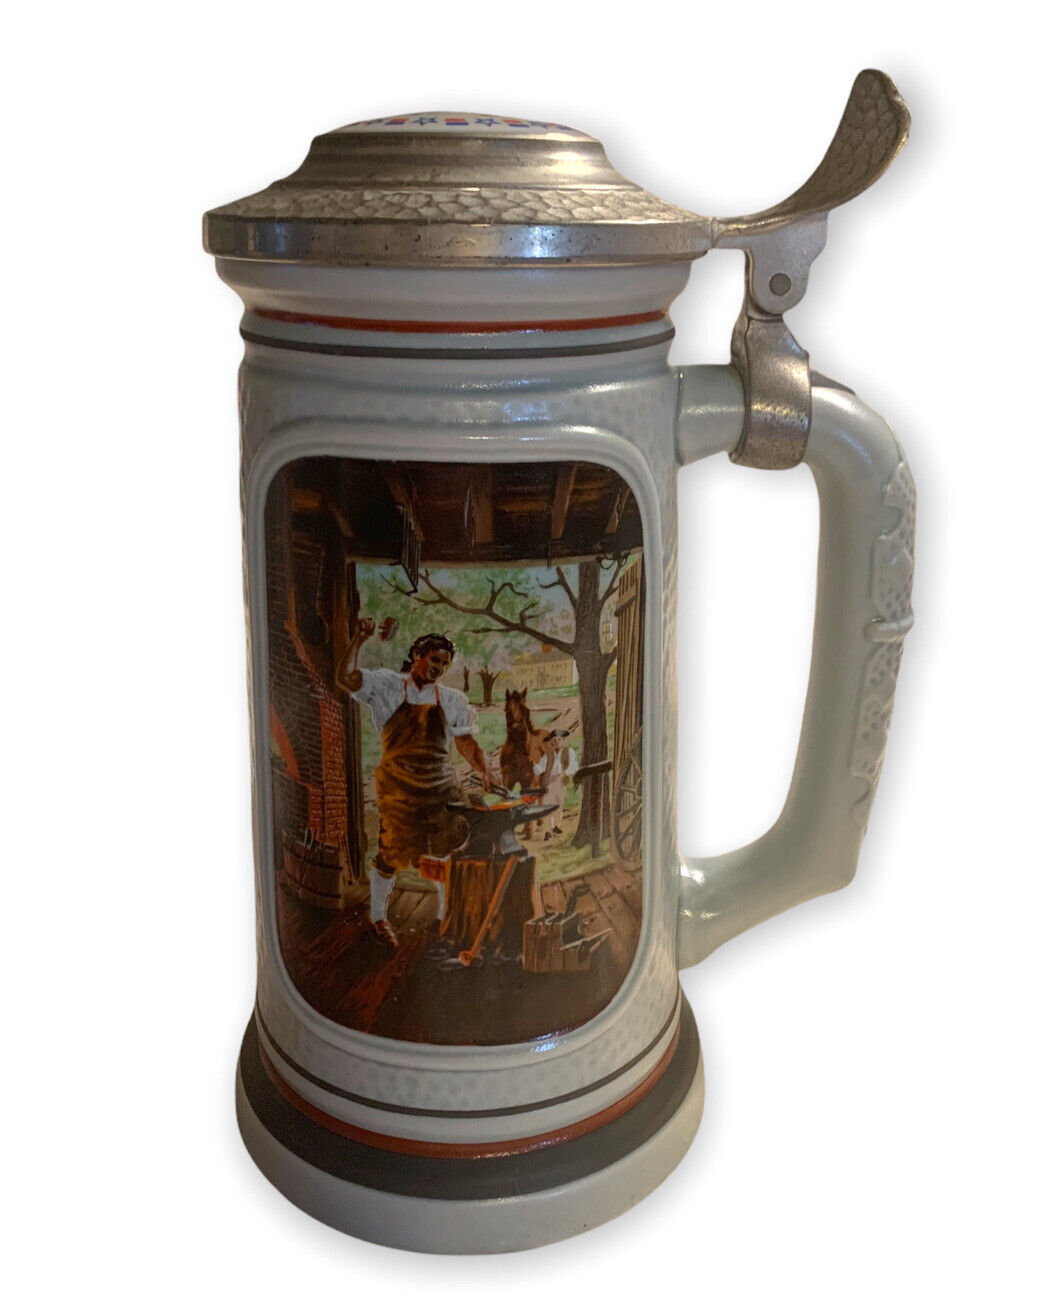 1985 Avon The Building Of America Collectable Beer Stein / Mug \